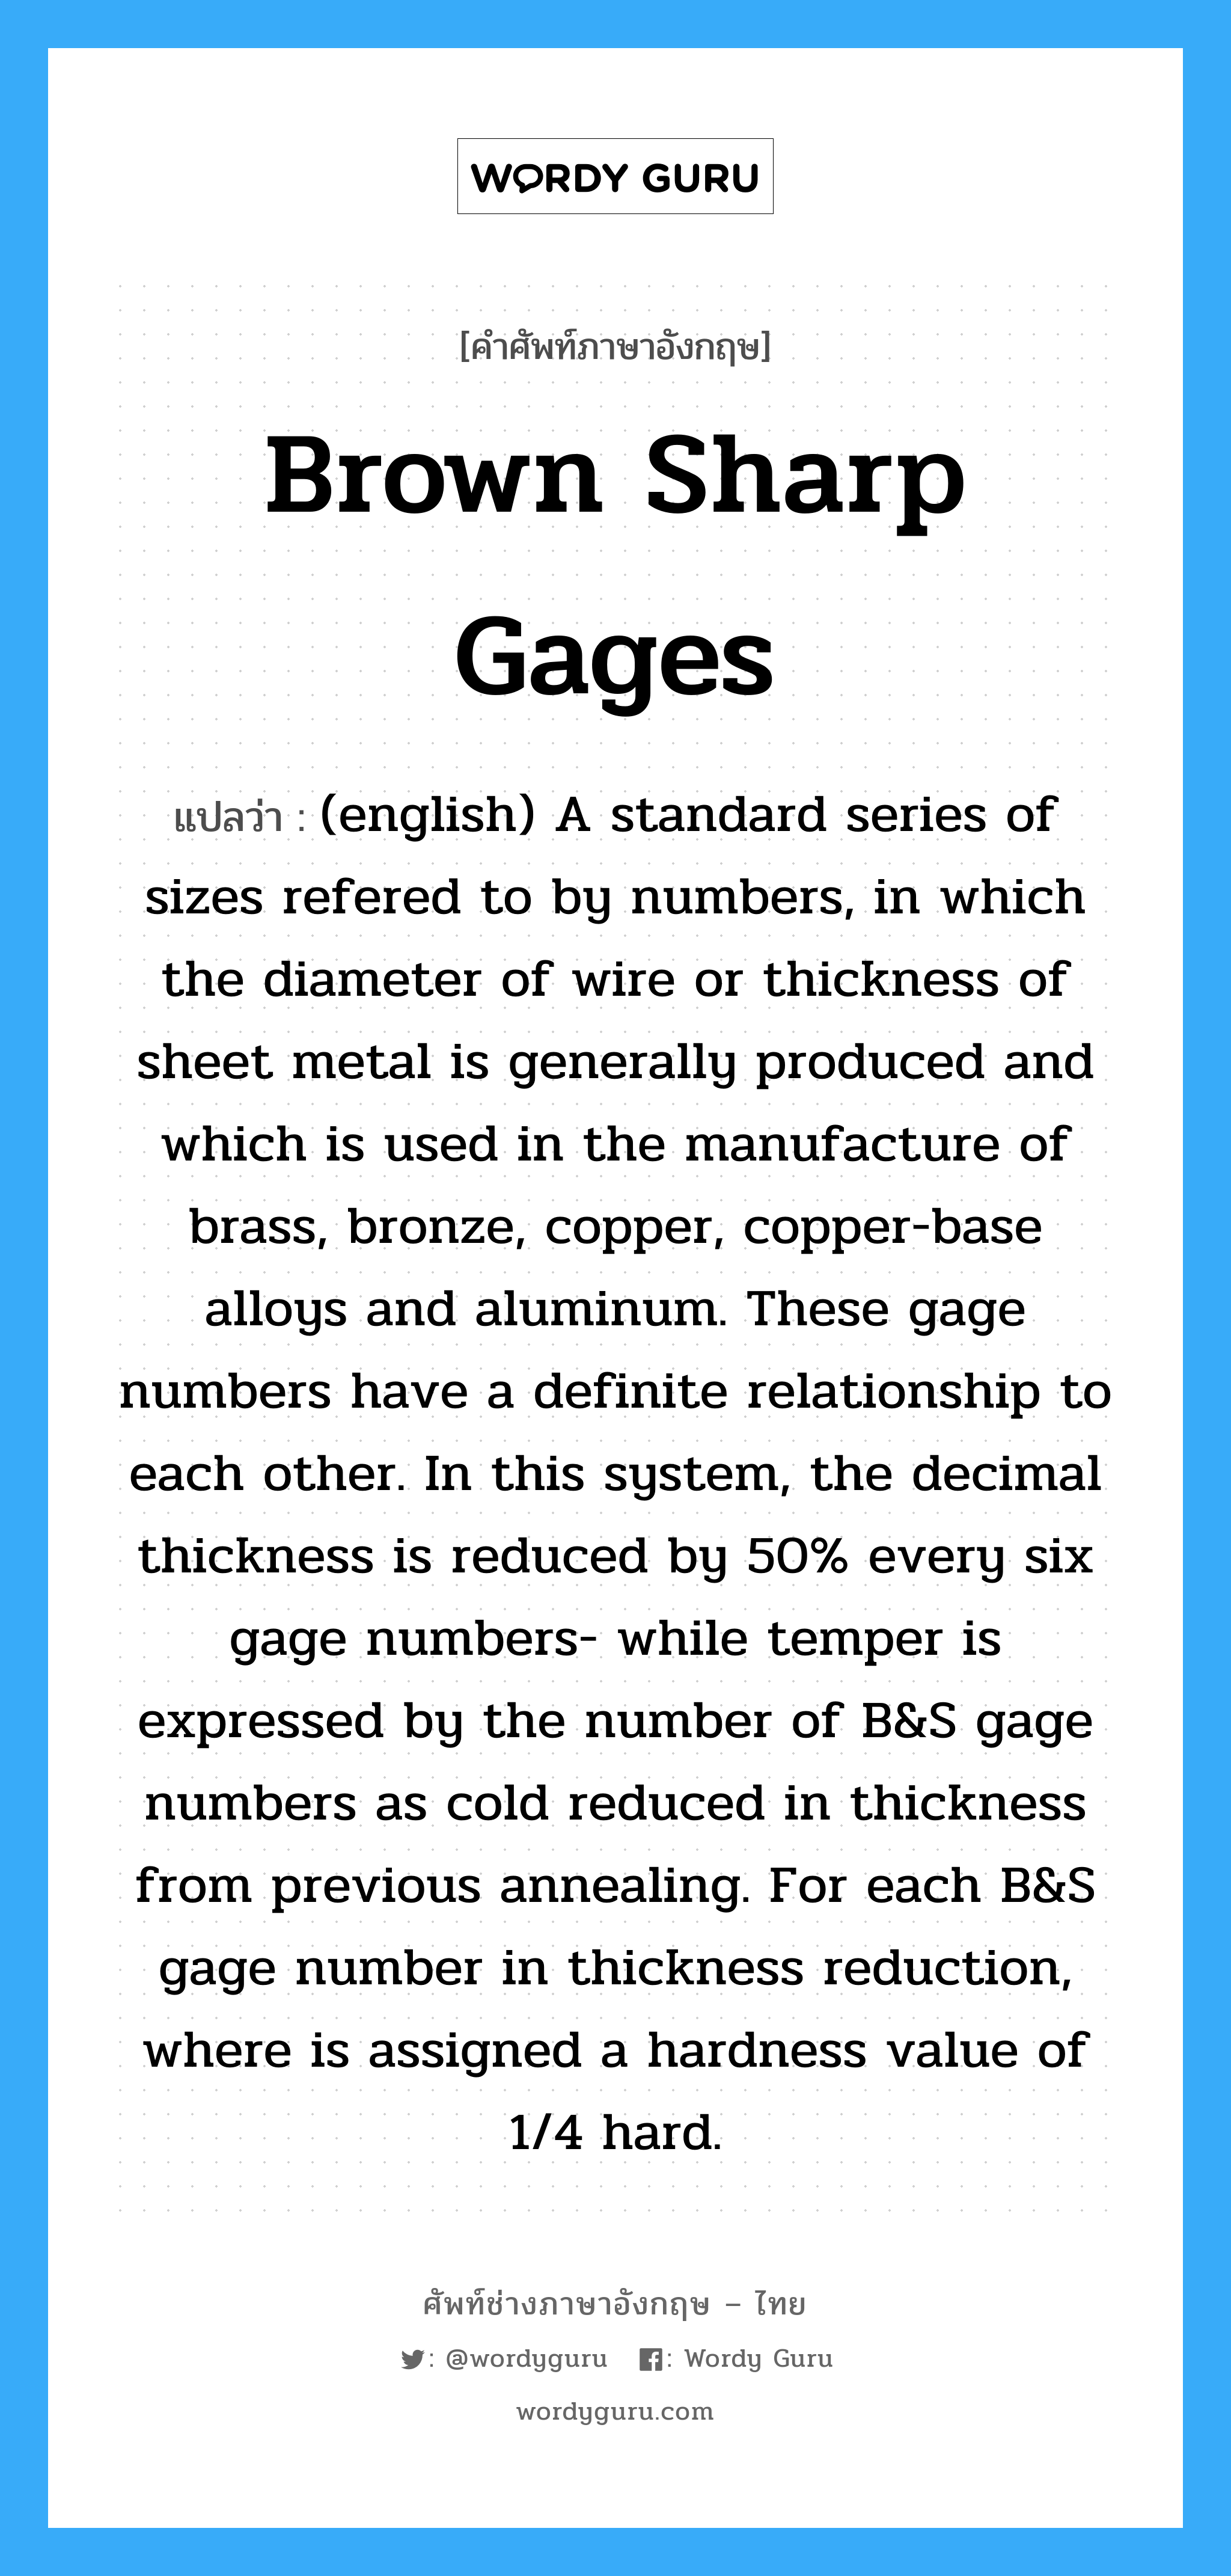 (english) A standard series of sizes refered to by numbers, in which the diameter of wire or thickness of sheet metal is generally produced and which is used in the manufacture of brass, bronze, copper, copper-base alloys and aluminum. These gage numbers have a definite relationship to each other. In this system, the decimal thickness is reduced by 50% every six gage numbers- while temper is expressed by the number of B&S gage numbers as cold reduced in thickness from previous annealing. For each B&S gage number in thickness reduction, where is assigned a hardness value of 1/4 hard. ภาษาอังกฤษ?, คำศัพท์ช่างภาษาอังกฤษ - ไทย (english) A standard series of sizes refered to by numbers, in which the diameter of wire or thickness of sheet metal is generally produced and which is used in the manufacture of brass, bronze, copper, copper-base alloys and aluminum. These gage numbers have a definite relationship to each other. In this system, the decimal thickness is reduced by 50% every six gage numbers- while temper is expressed by the number of B&amp;S gage numbers as cold reduced in thickness from previous annealing. For each B&amp;S gage number in thickness reduction, where is assigned a hardness value of 1/4 hard. คำศัพท์ภาษาอังกฤษ (english) A standard series of sizes refered to by numbers, in which the diameter of wire or thickness of sheet metal is generally produced and which is used in the manufacture of brass, bronze, copper, copper-base alloys and aluminum. These gage numbers have a definite relationship to each other. In this system, the decimal thickness is reduced by 50% every six gage numbers- while temper is expressed by the number of B&amp;S gage numbers as cold reduced in thickness from previous annealing. For each B&amp;S gage number in thickness reduction, where is assigned a hardness value of 1/4 hard. แปลว่า Brown Sharp Gages